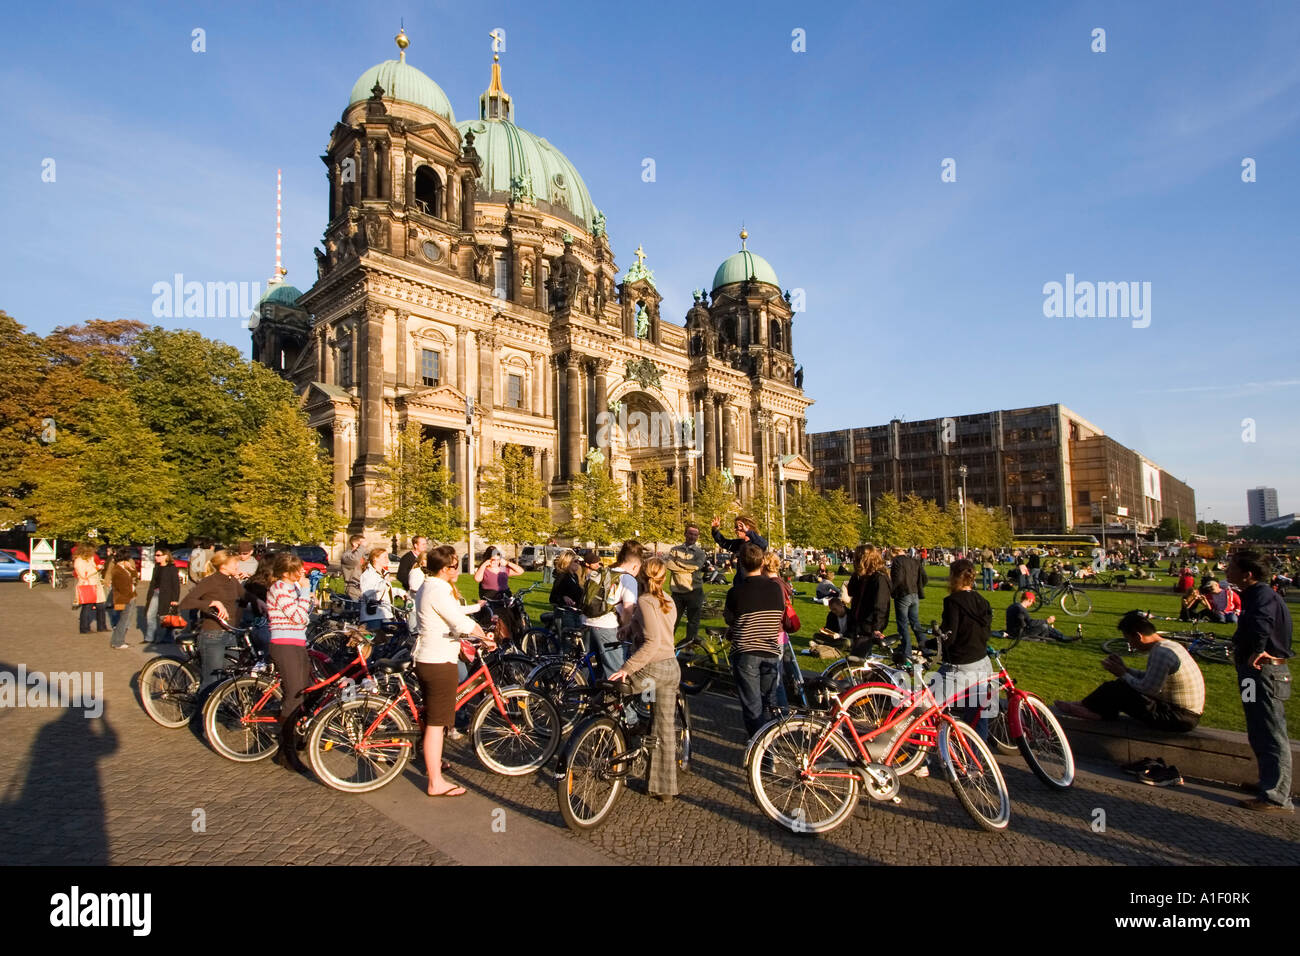 Berlin dome tour guide with tourists on bicylces Stock Photo